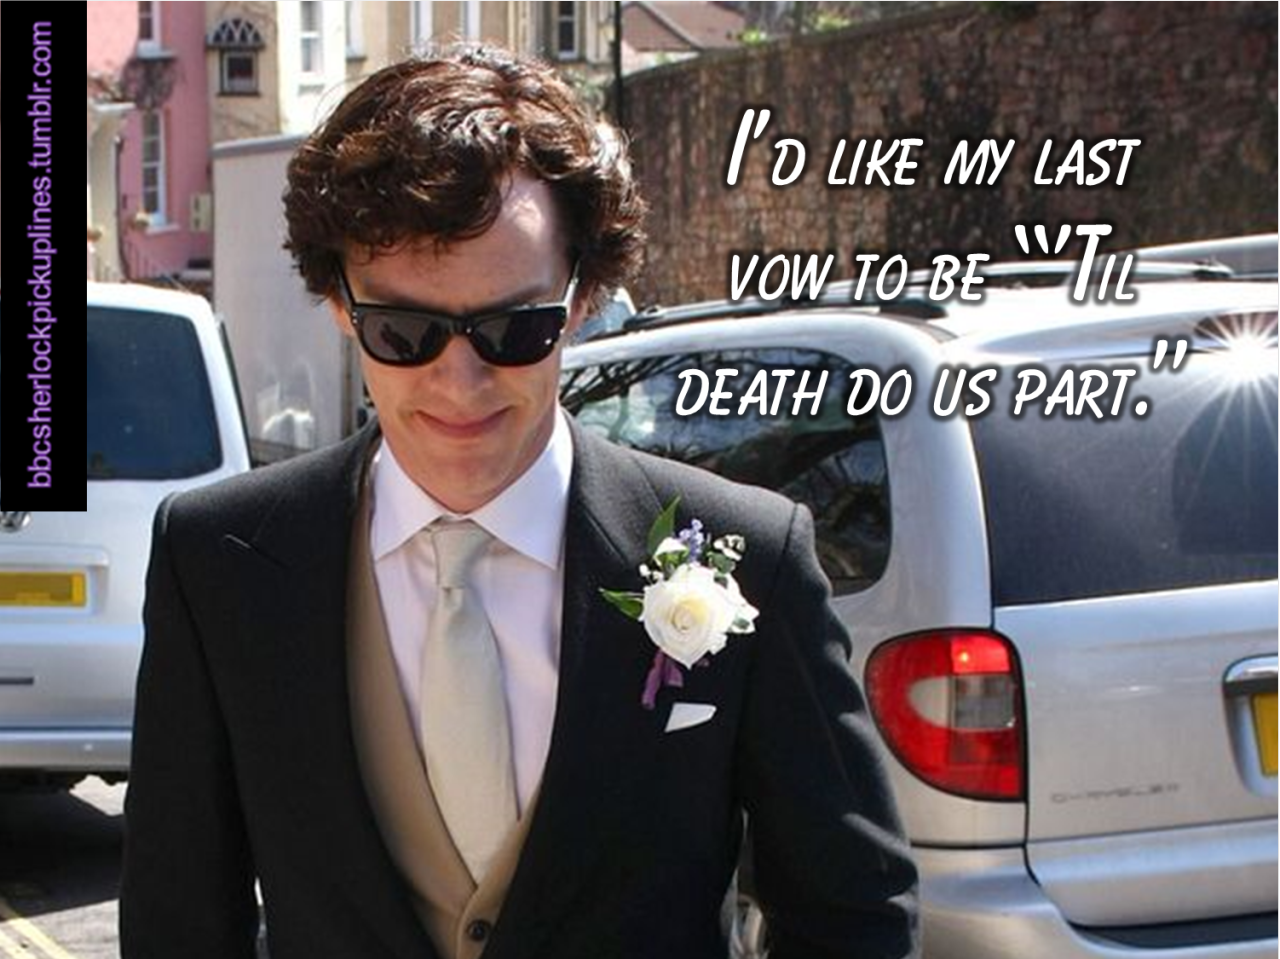 &ldquo;I&rsquo;d like my last vow to be &rsquo;&lsquo;Til death do